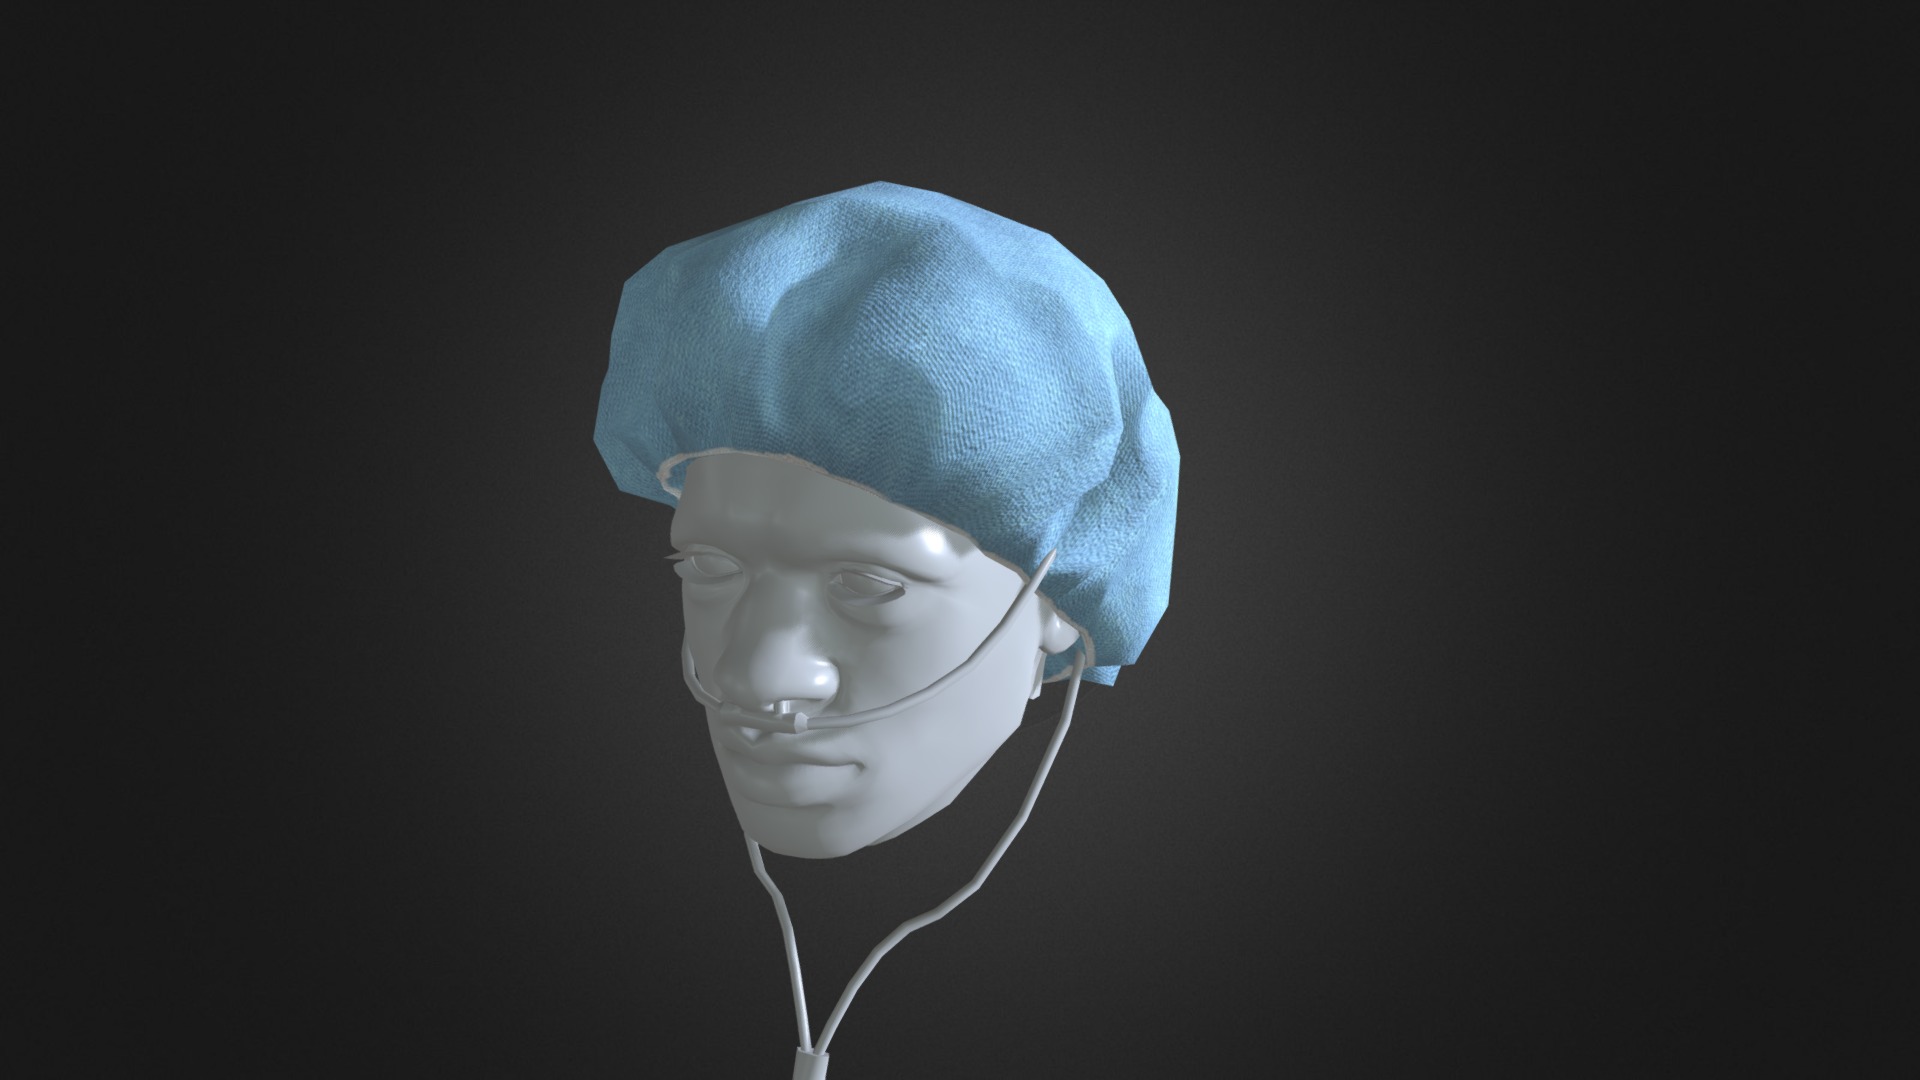 3D model Charlotte - This is a 3D model of the Charlotte. The 3D model is about a person wearing a mask.